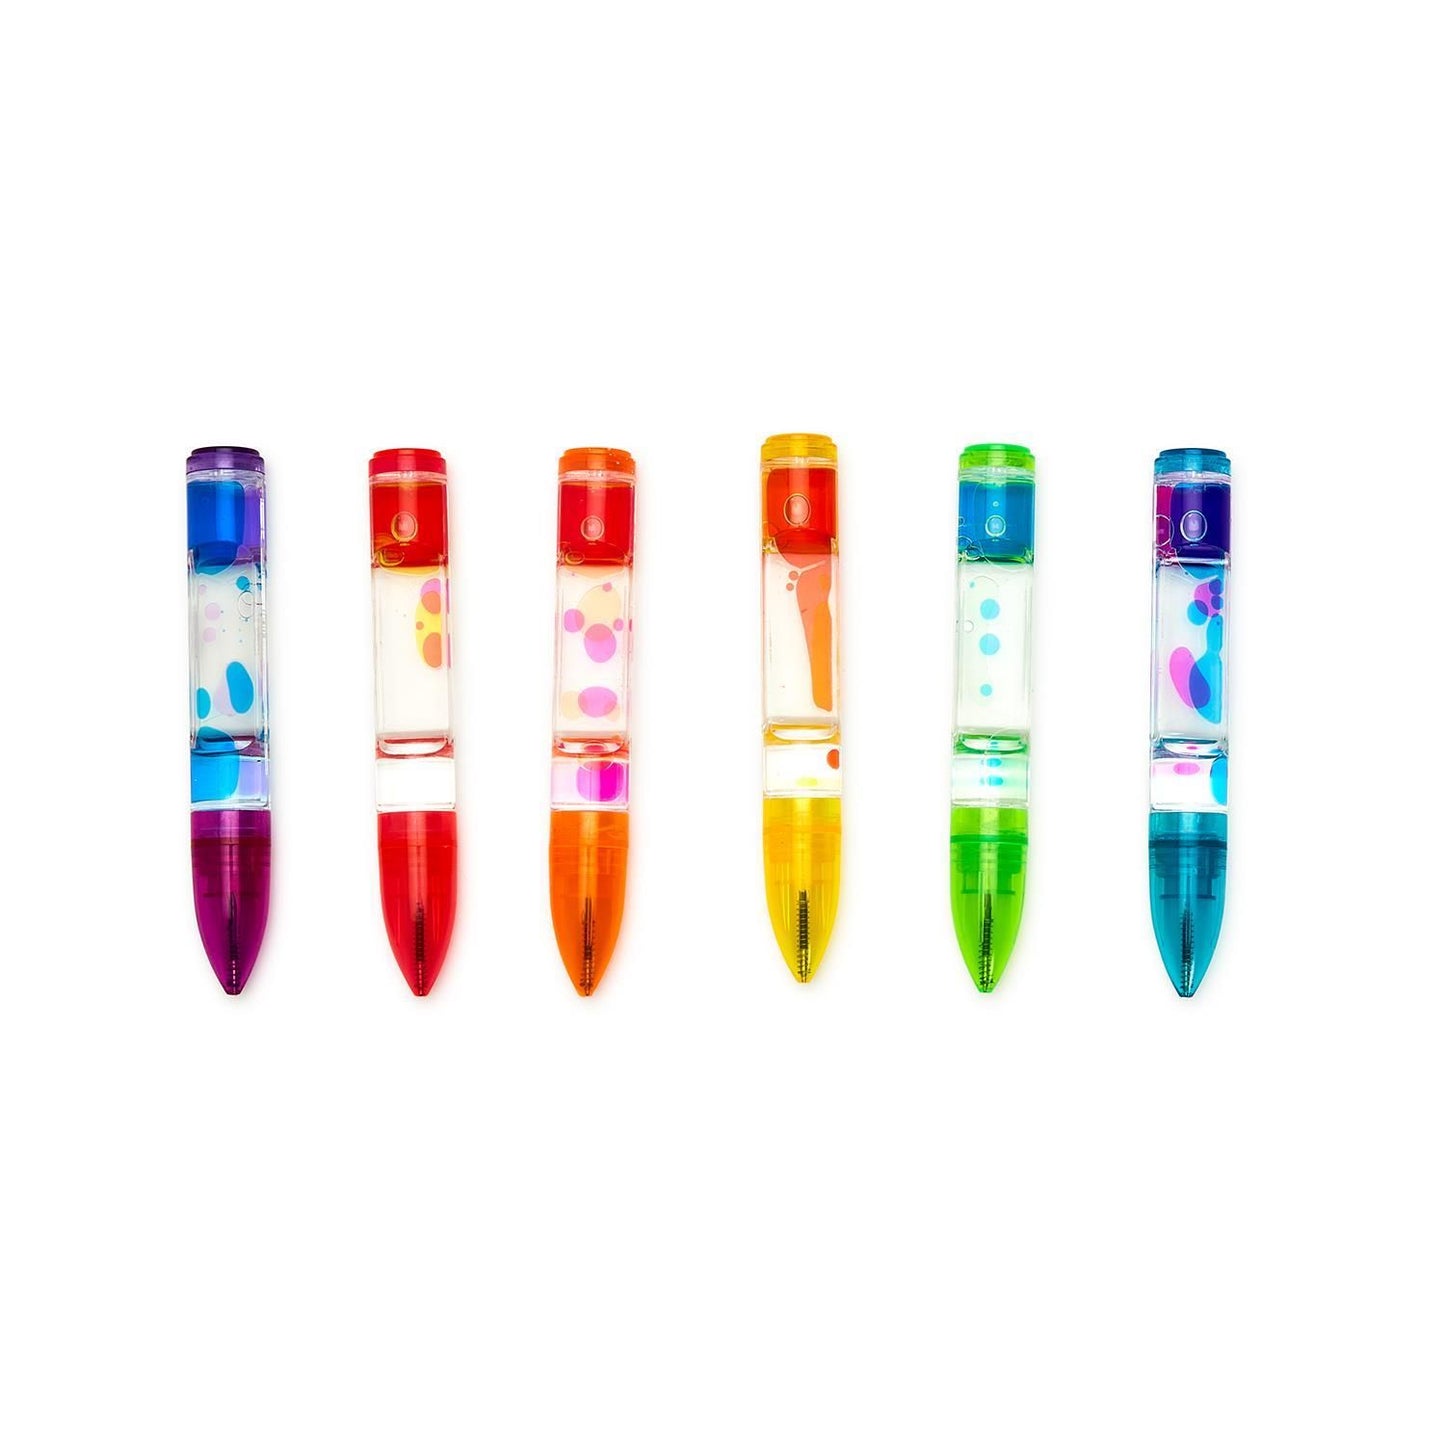 Two's Company Refill For Motion Drops 24-Pieces Pen in 6 Colors